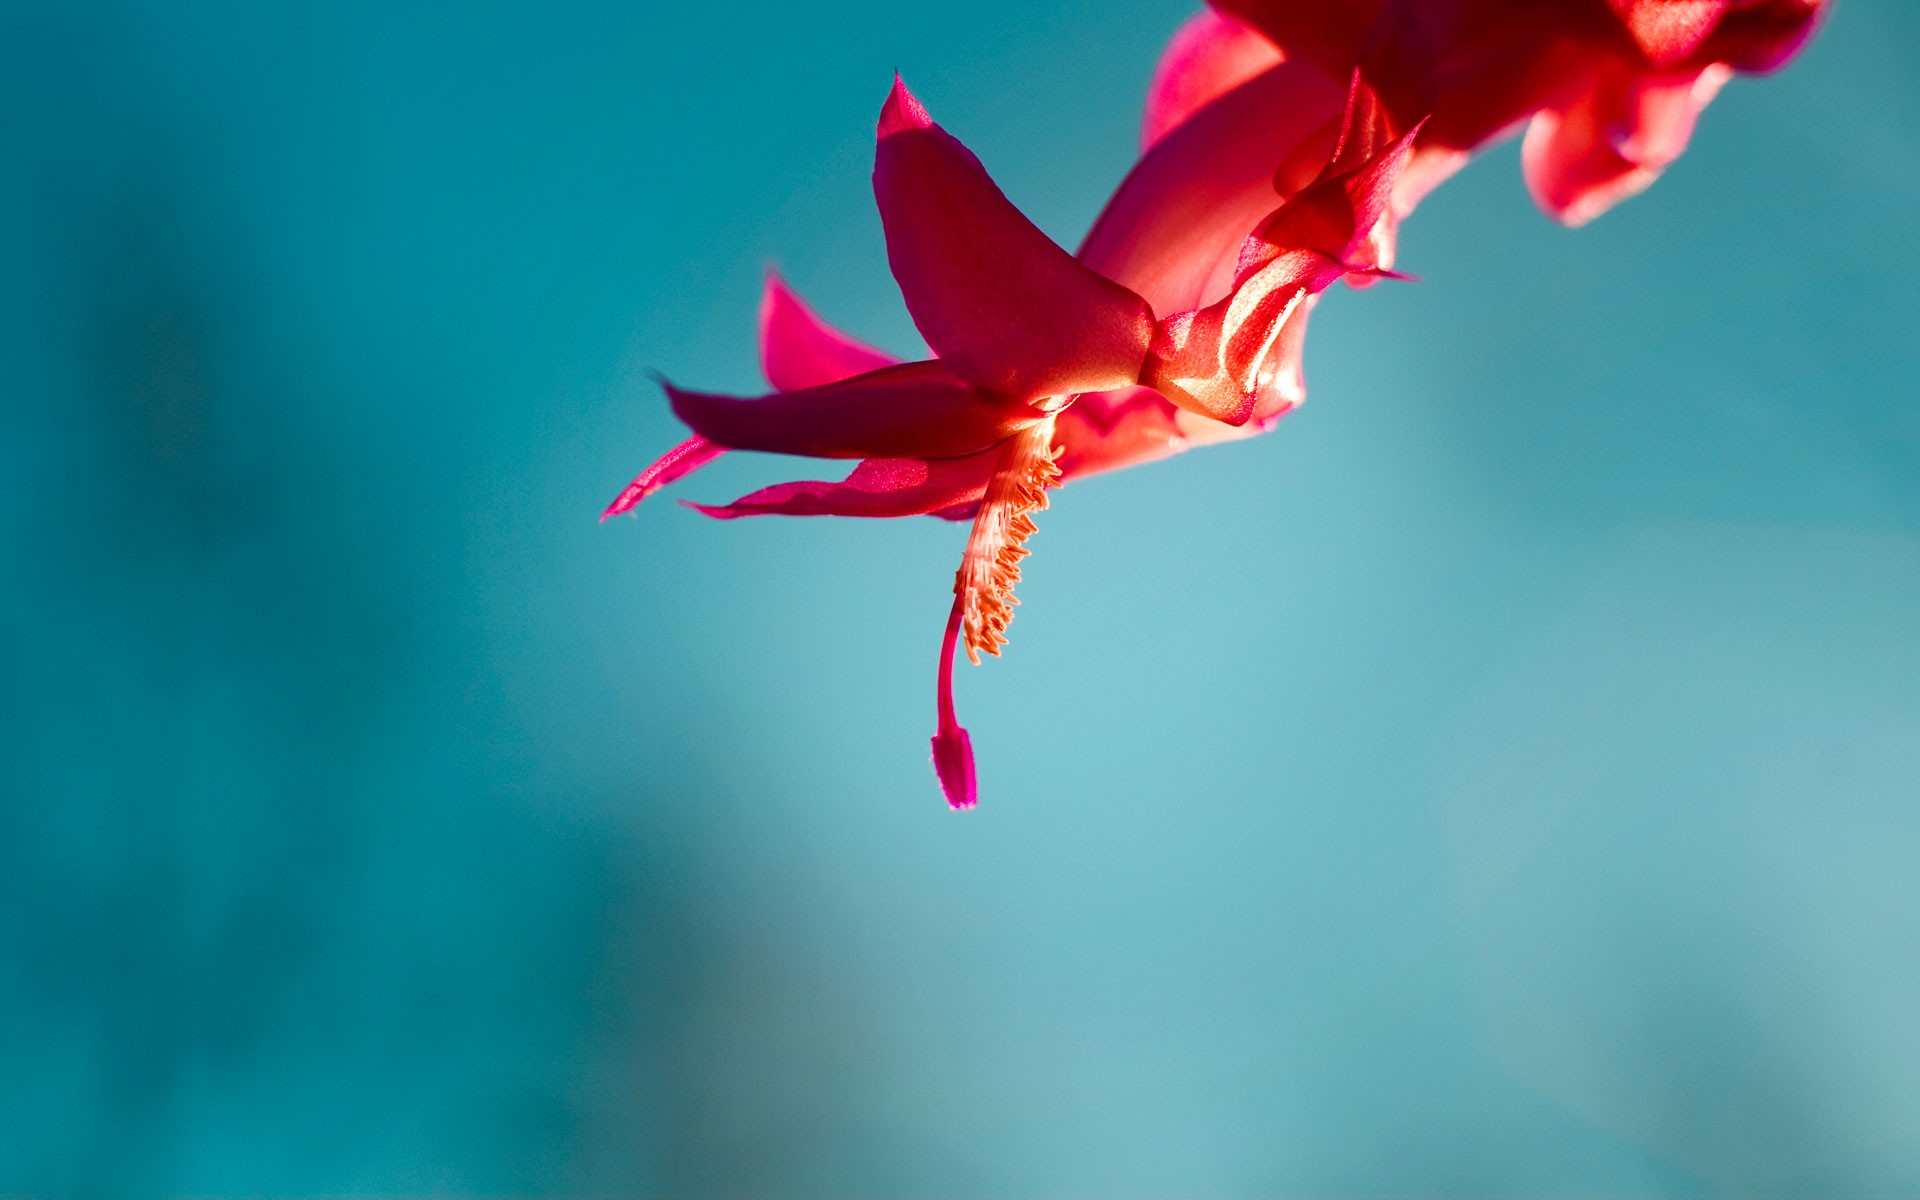 1920x1200 Wallpaper : simple background, reflection, sky, blue, red flowers, color, leaf, flower, plant, petal, computer wallpaper, atmosphere of earth, close up, macro photography RaidyHD 124465 HD Wallpapers